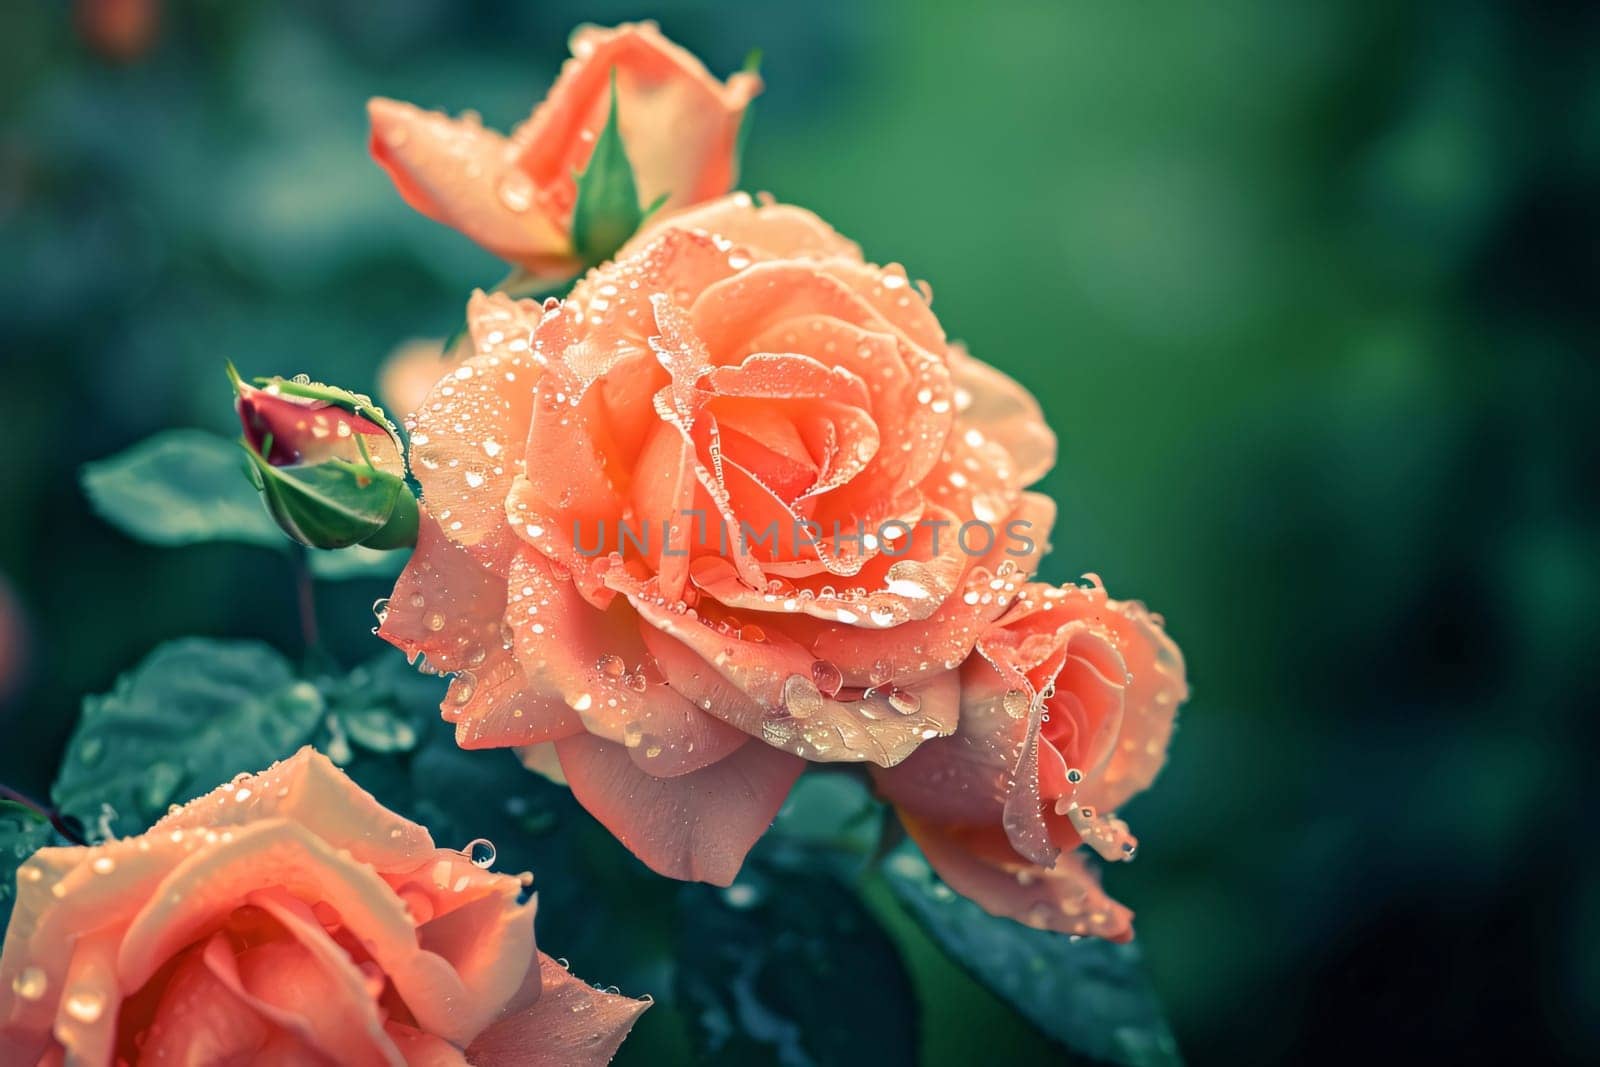 Orange rose blossoms with tiny, drops of water, rain on smudged green background. Flowering flowers, a symbol of spring, new life. A joyful time of nature waking up to life.